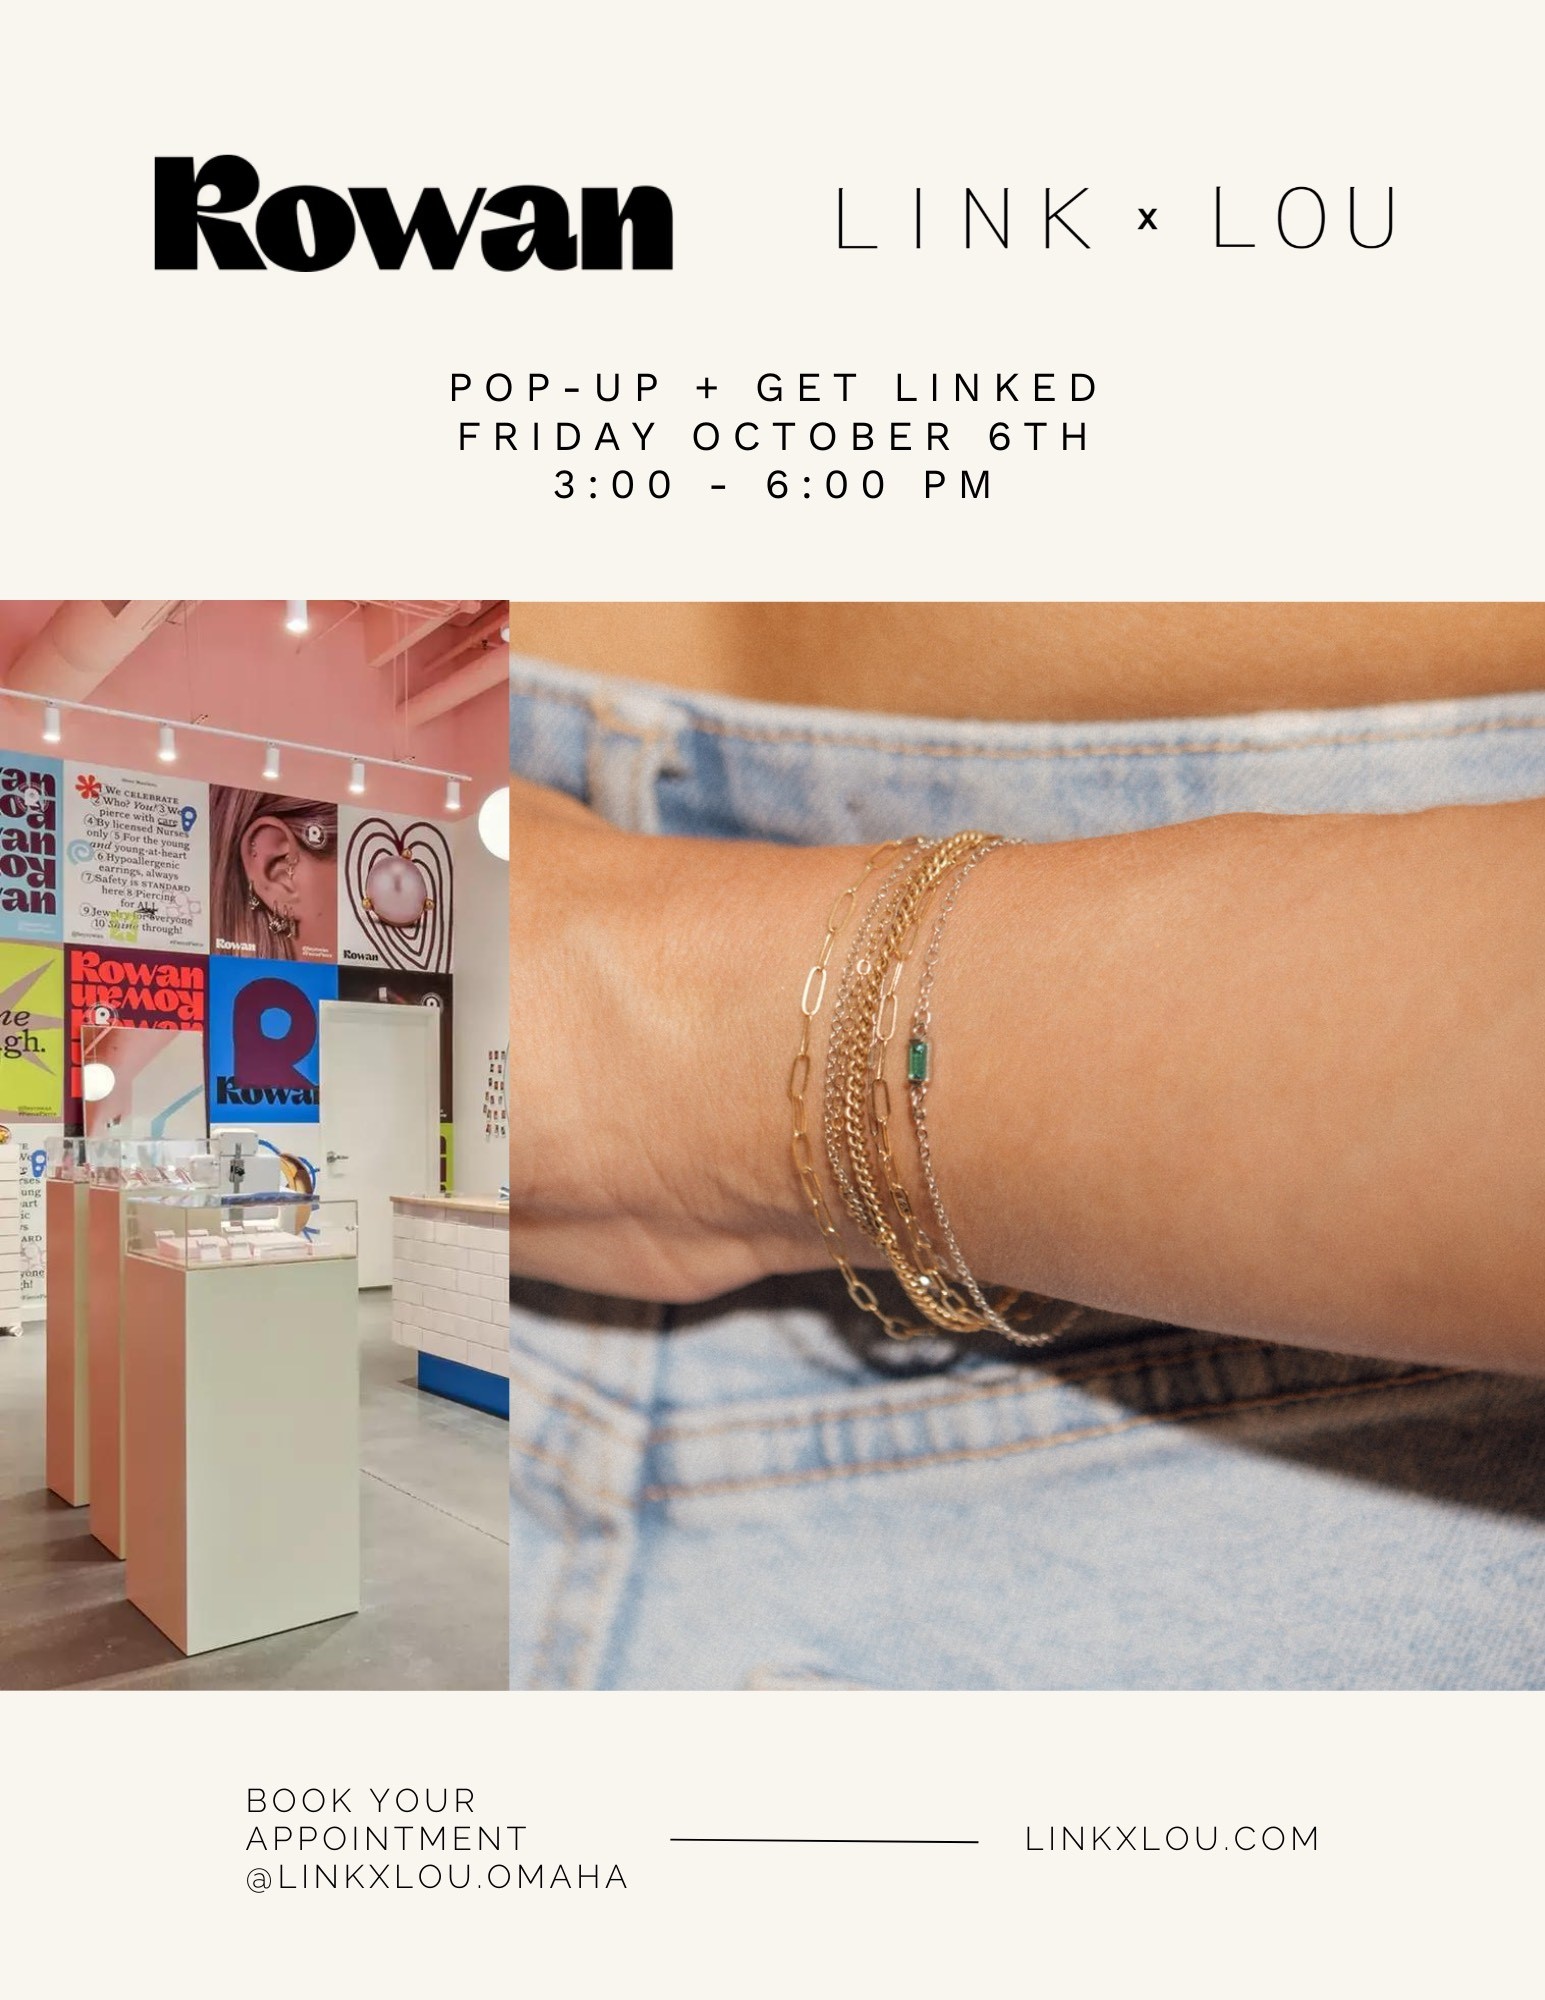 Rowan and LINK x LOU Pop-Up Event